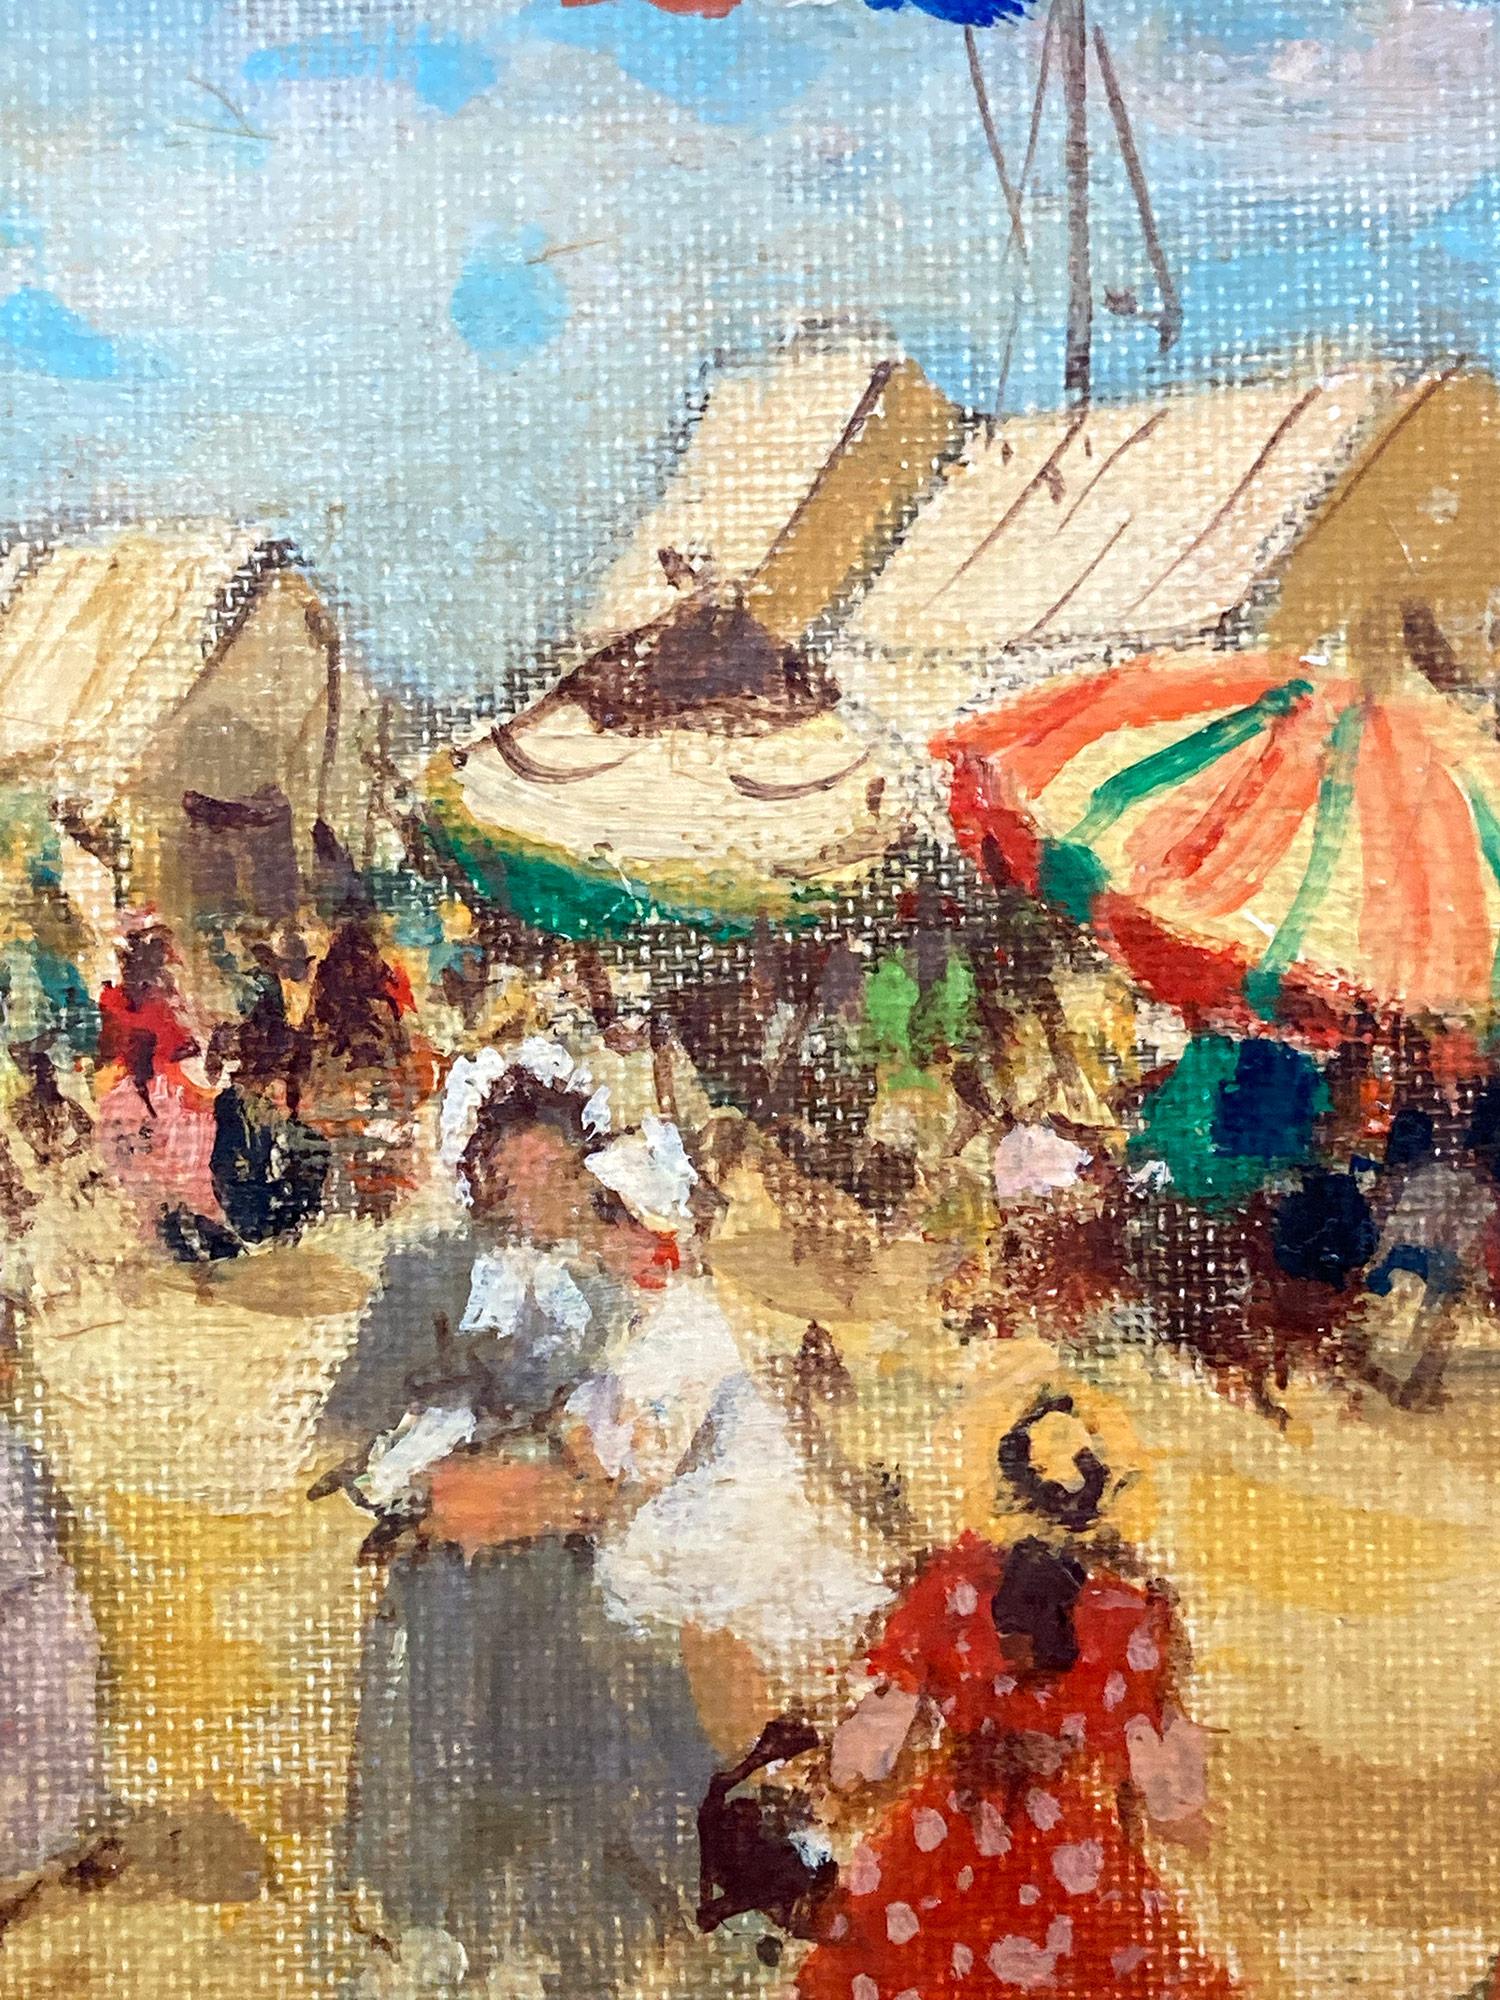 A stunning oil painting scene depicting figures by the beach in a sunny day at the Côte d'Azur France done in the 20th Century. The vibrant colors and impressionistic brushwork is done with both detail and precision. The people are depicted on a